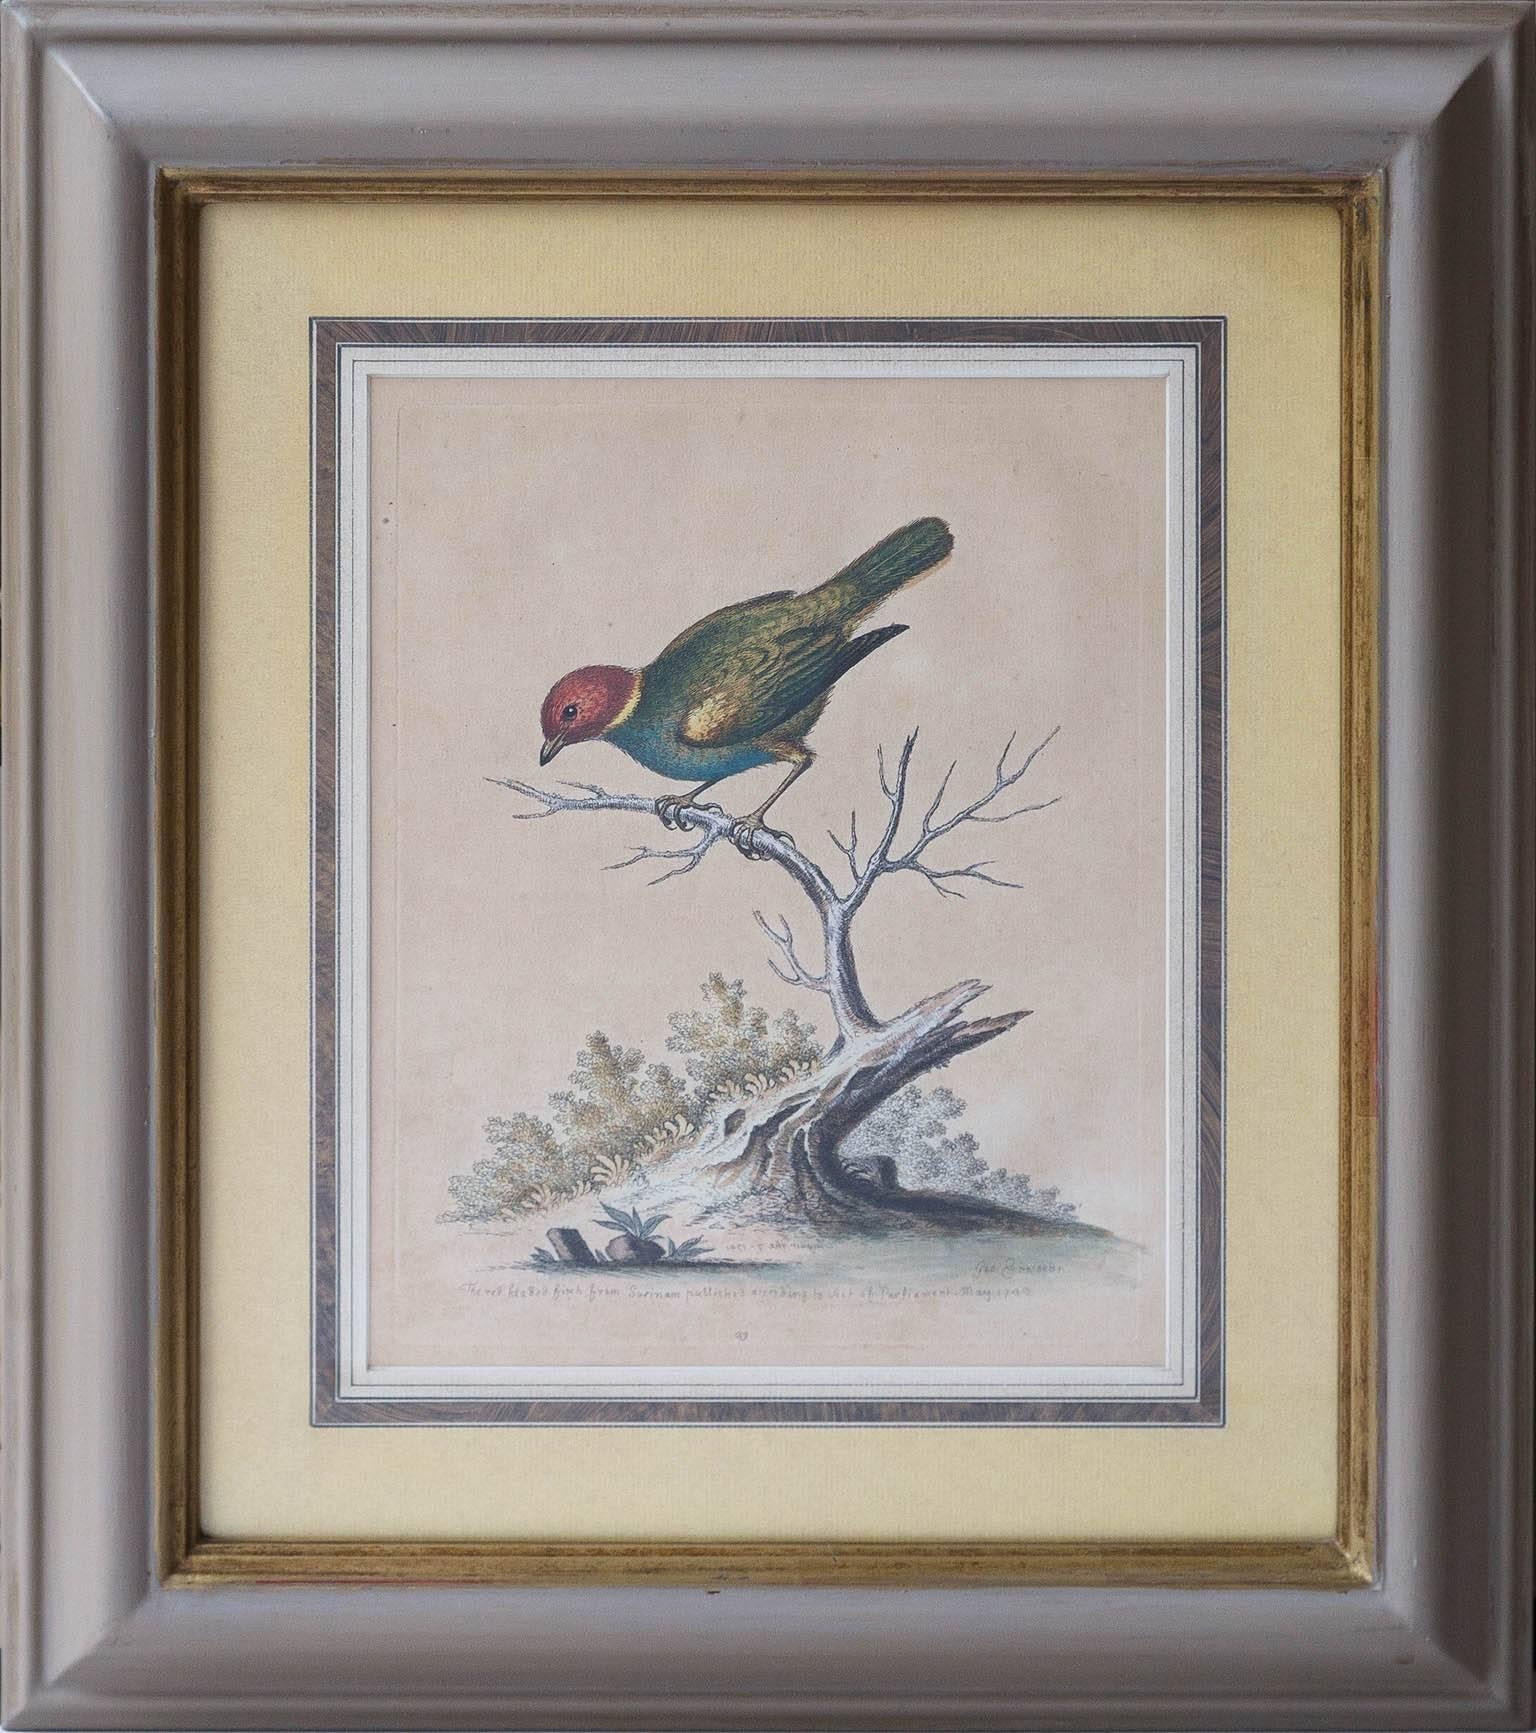 Paper Six Framed English 18th Century Bird Prints After George Edwards, Published 1740